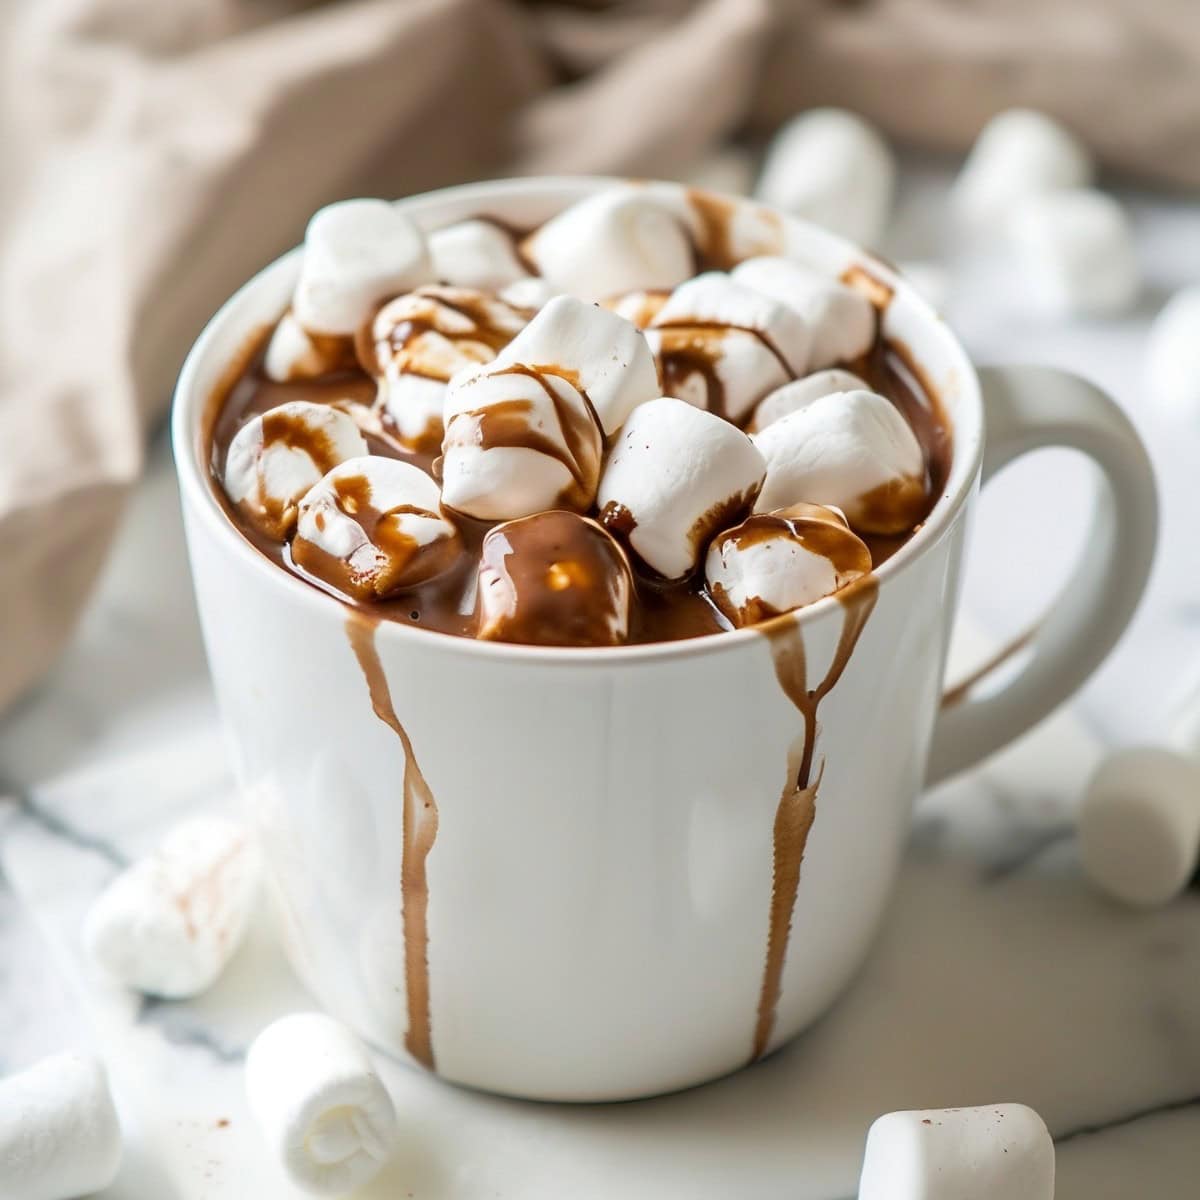 Mug of Crockpot Hot Chocolate with Marshmallows on a White Marble Table with More Marshmallows Around the Mug